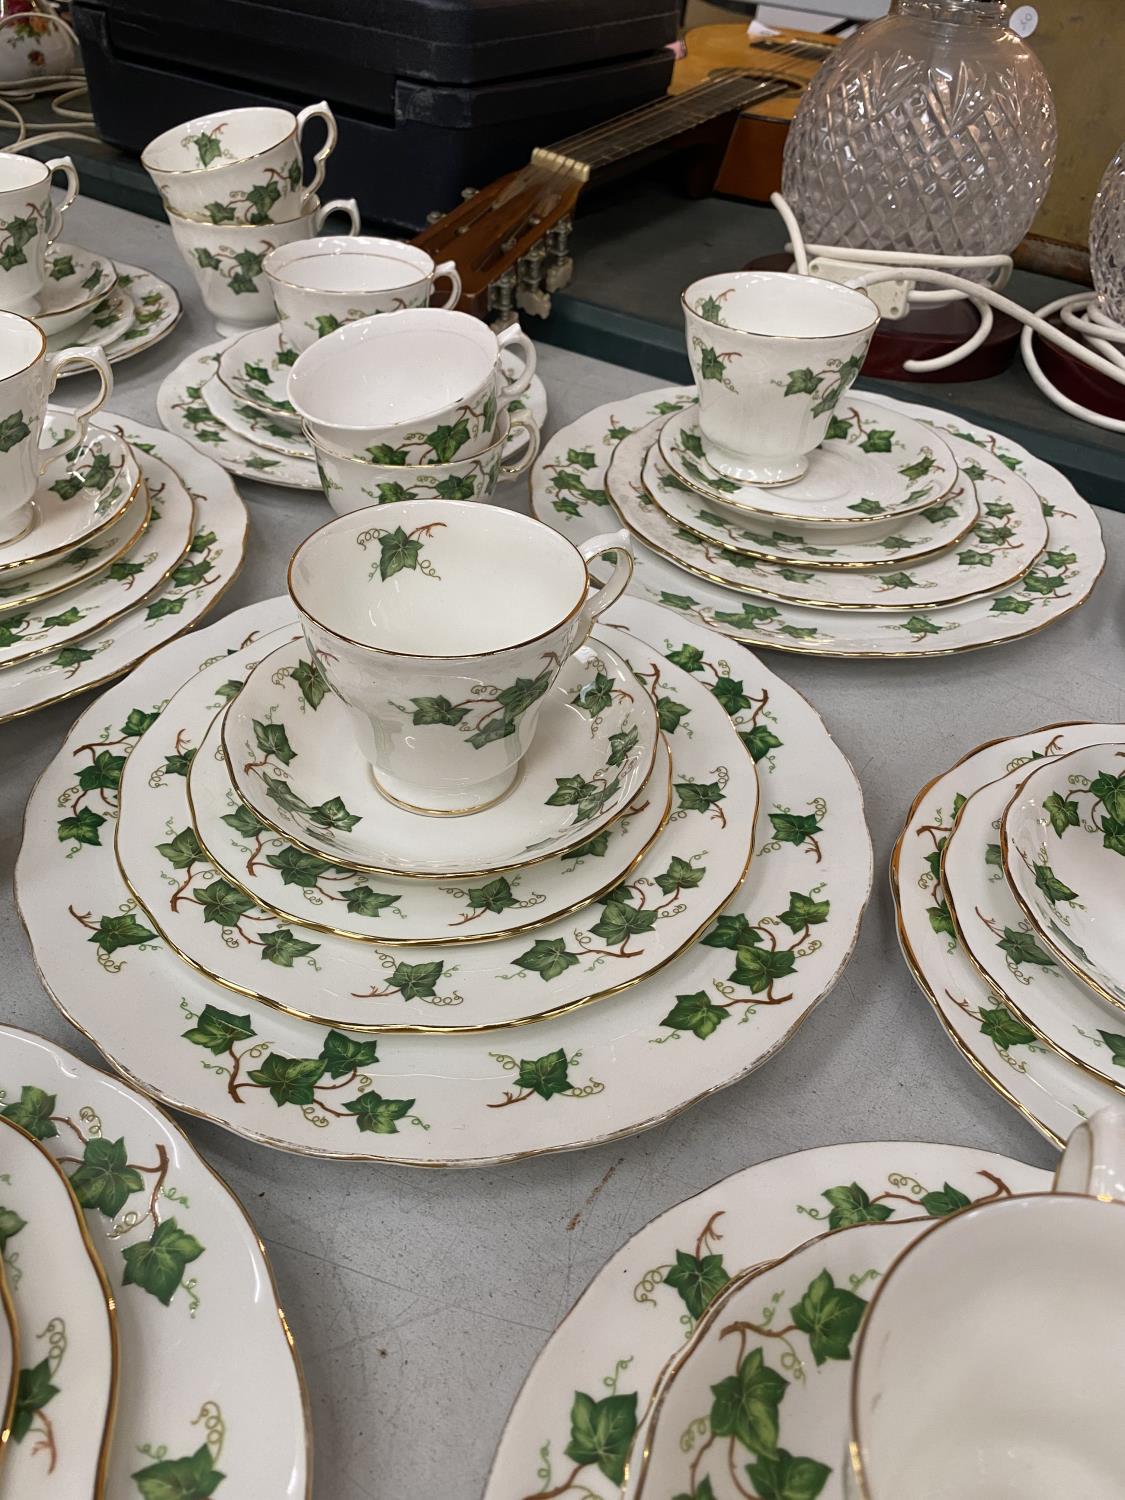 A LARGE COLLECTION OF COLCLOUGH 'IVY LEAF' BONE CHINA TO INCLUDE TEA CUPS, SAUCERS, PLATES, BOWLS, - Image 5 of 6